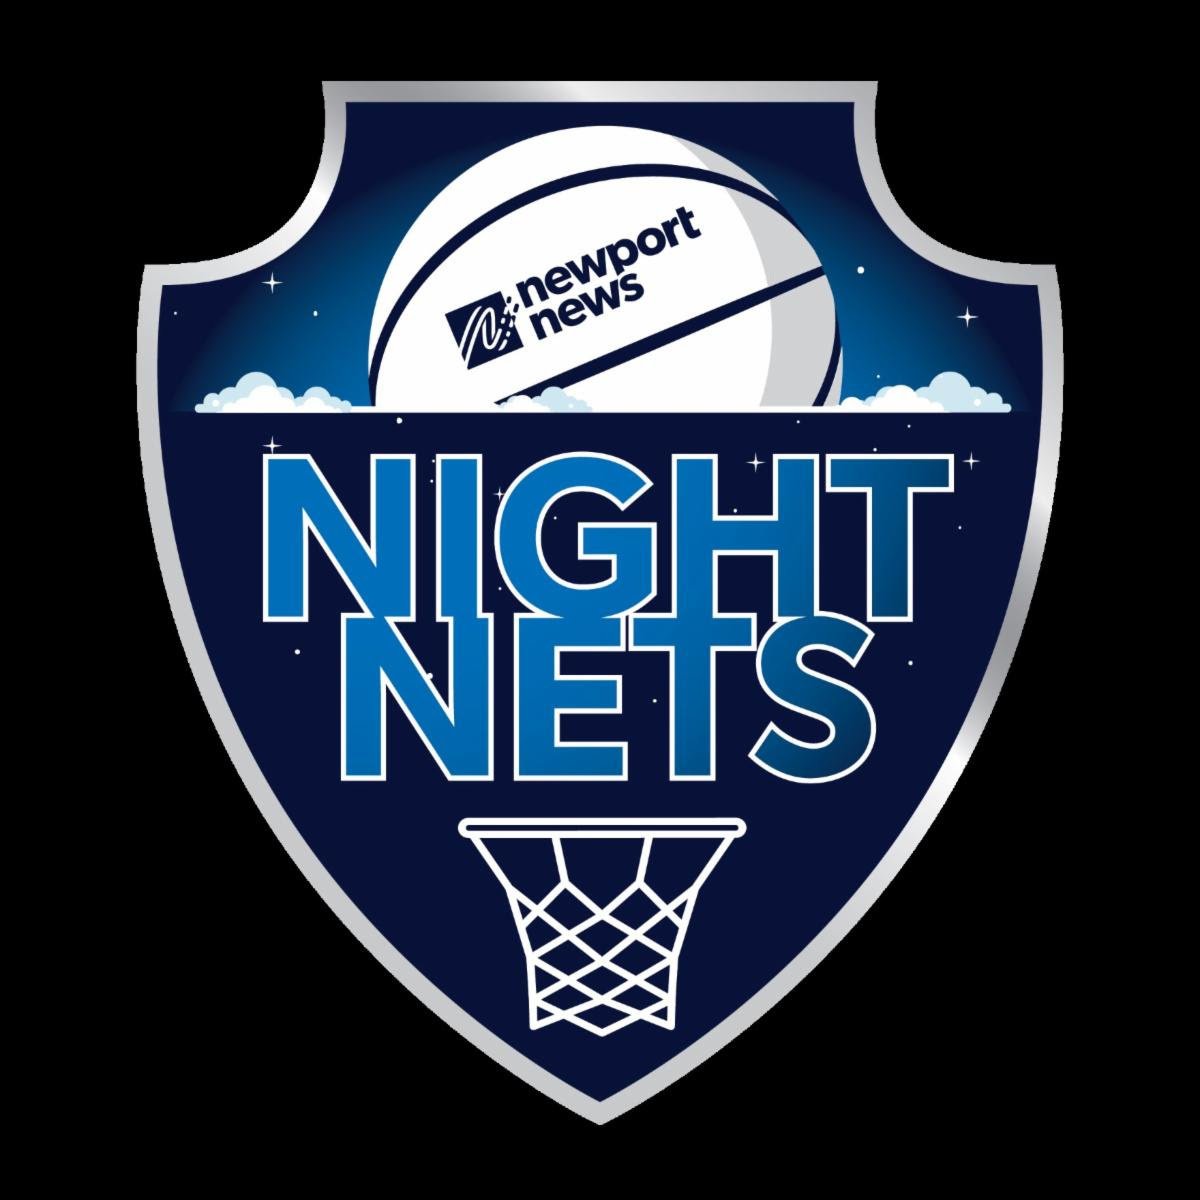 The @CityofNN is creating a new #basketball initiative called Friday Night Nets. The leagues will run Friday evenings (5/10-8/23) at the Achievable Dream Tennis Center and at the Denbigh Community Center. The leagues are FREE and open to Youth & young Adults (18+).